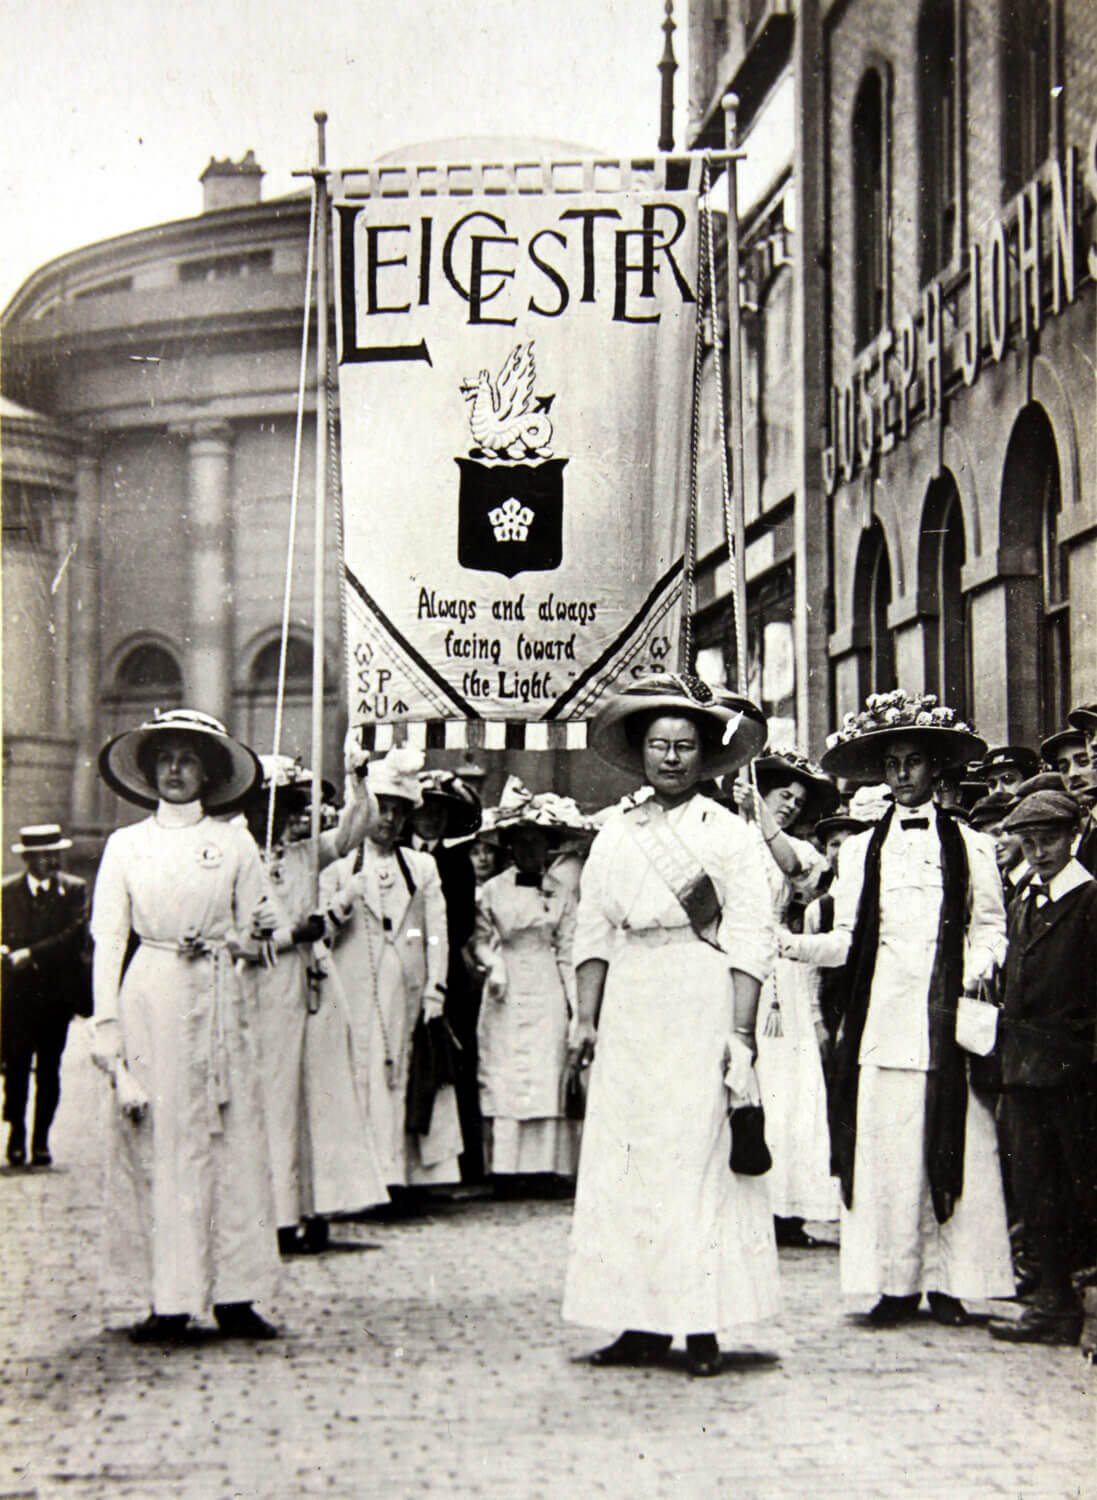 Leicester Suffragettes. Demonstration in Bowling Green Street May 1911 - Leicestershire Record Office